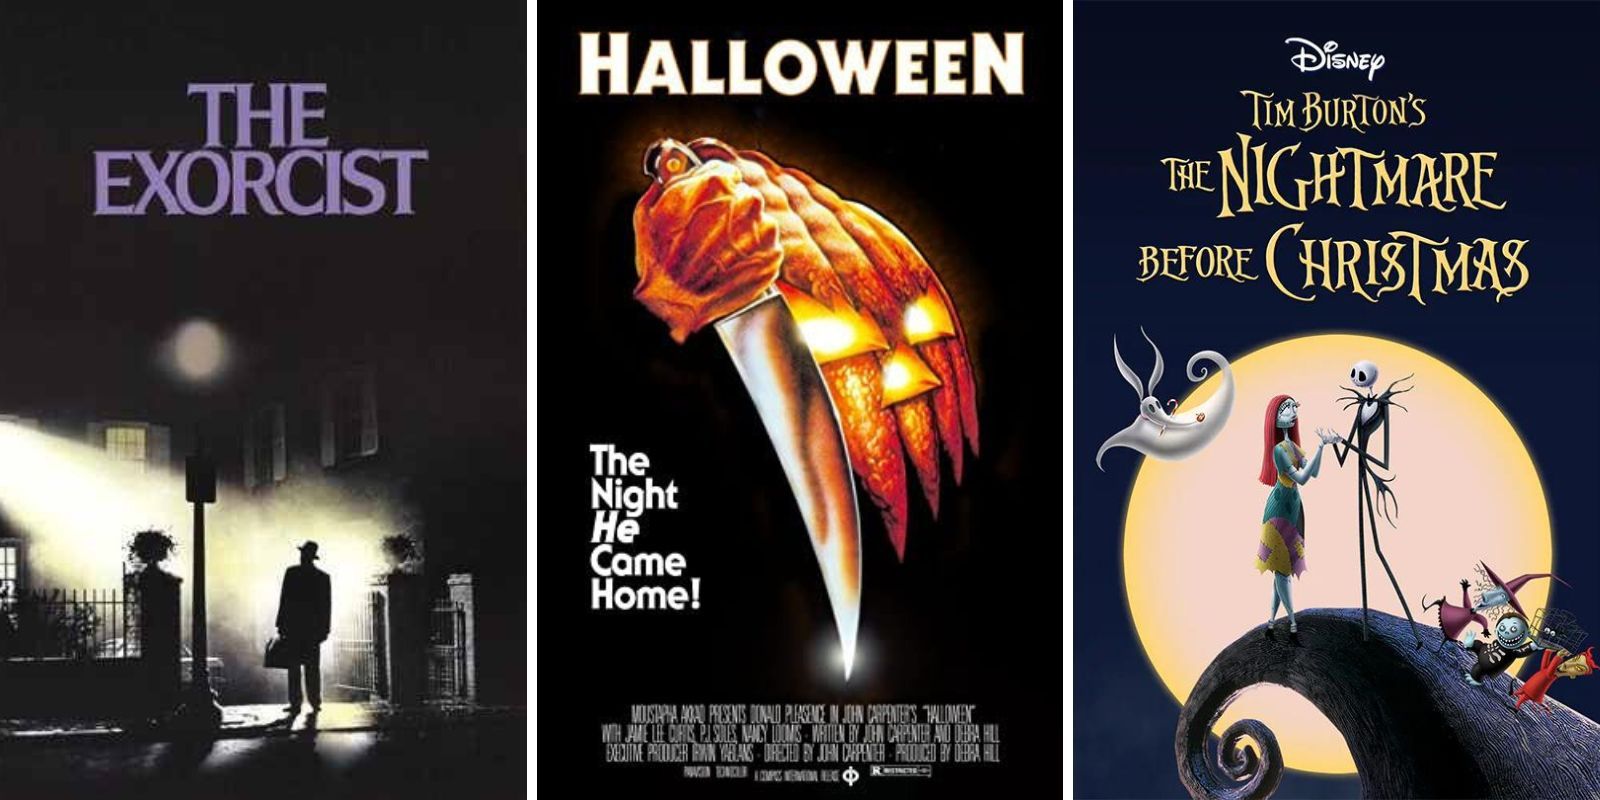 Split of The Exorcist, The Nightmare Before Christmas and Halloween